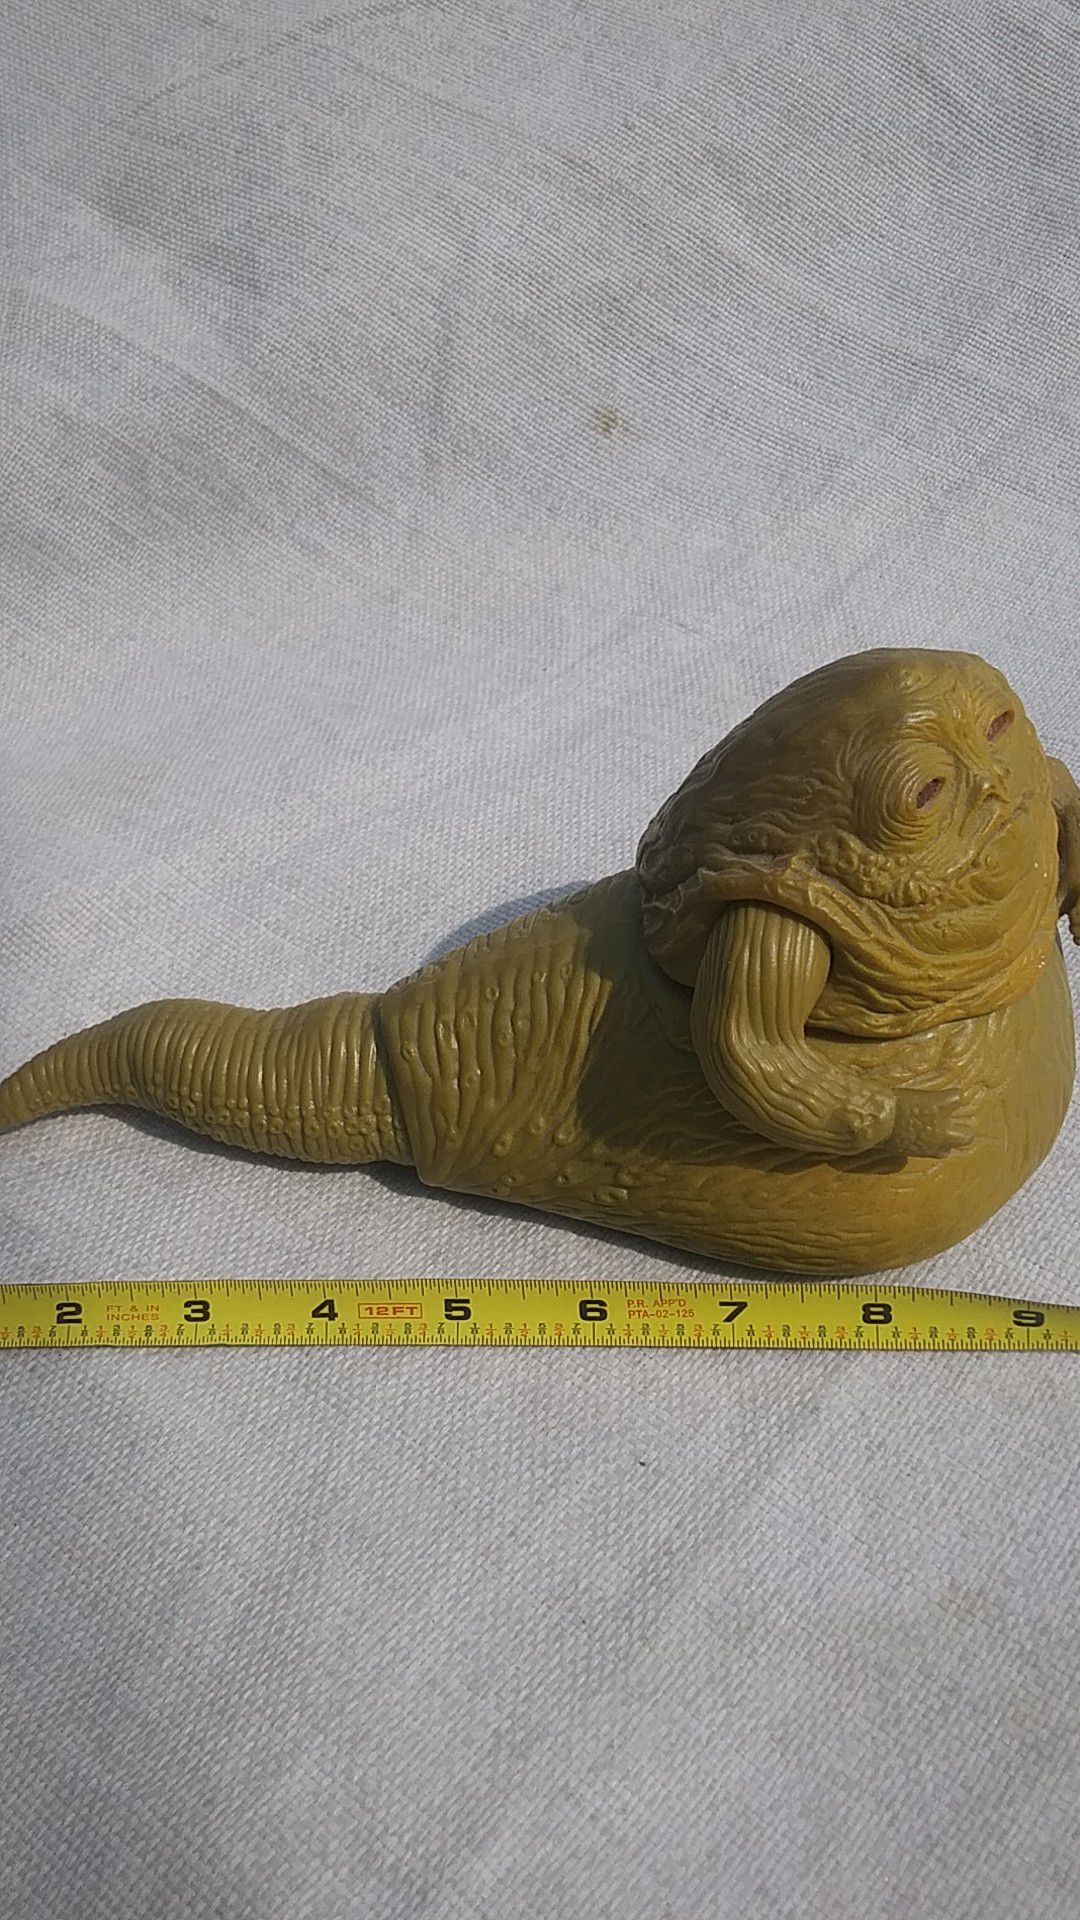 1983 Jabba the Hutt toy. 9in long